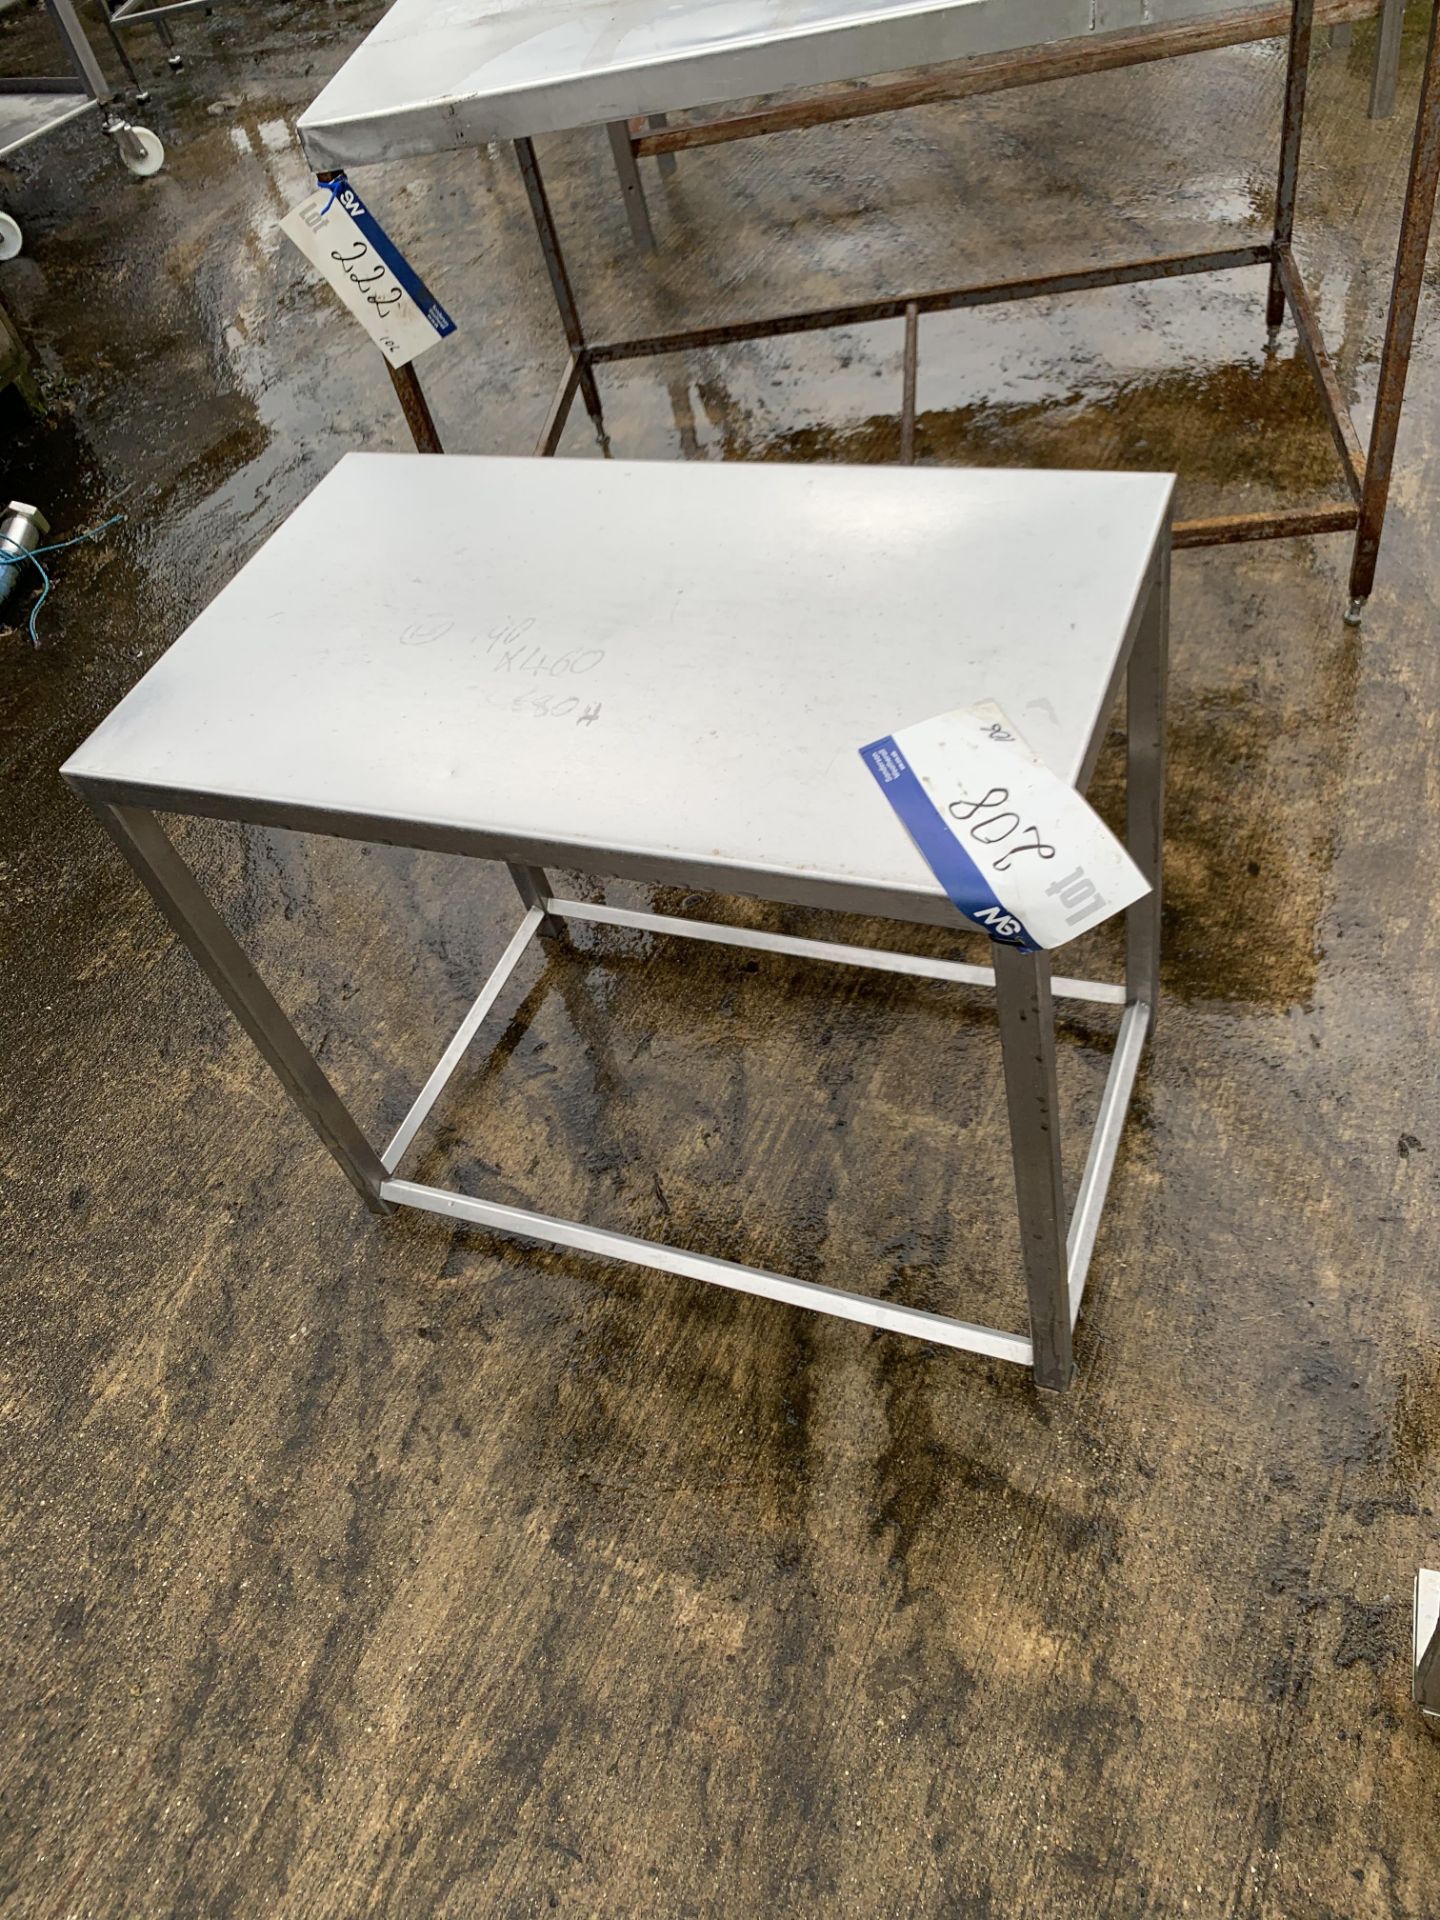 Stainless Steel Table, approx. 0.68m high x 0.79m